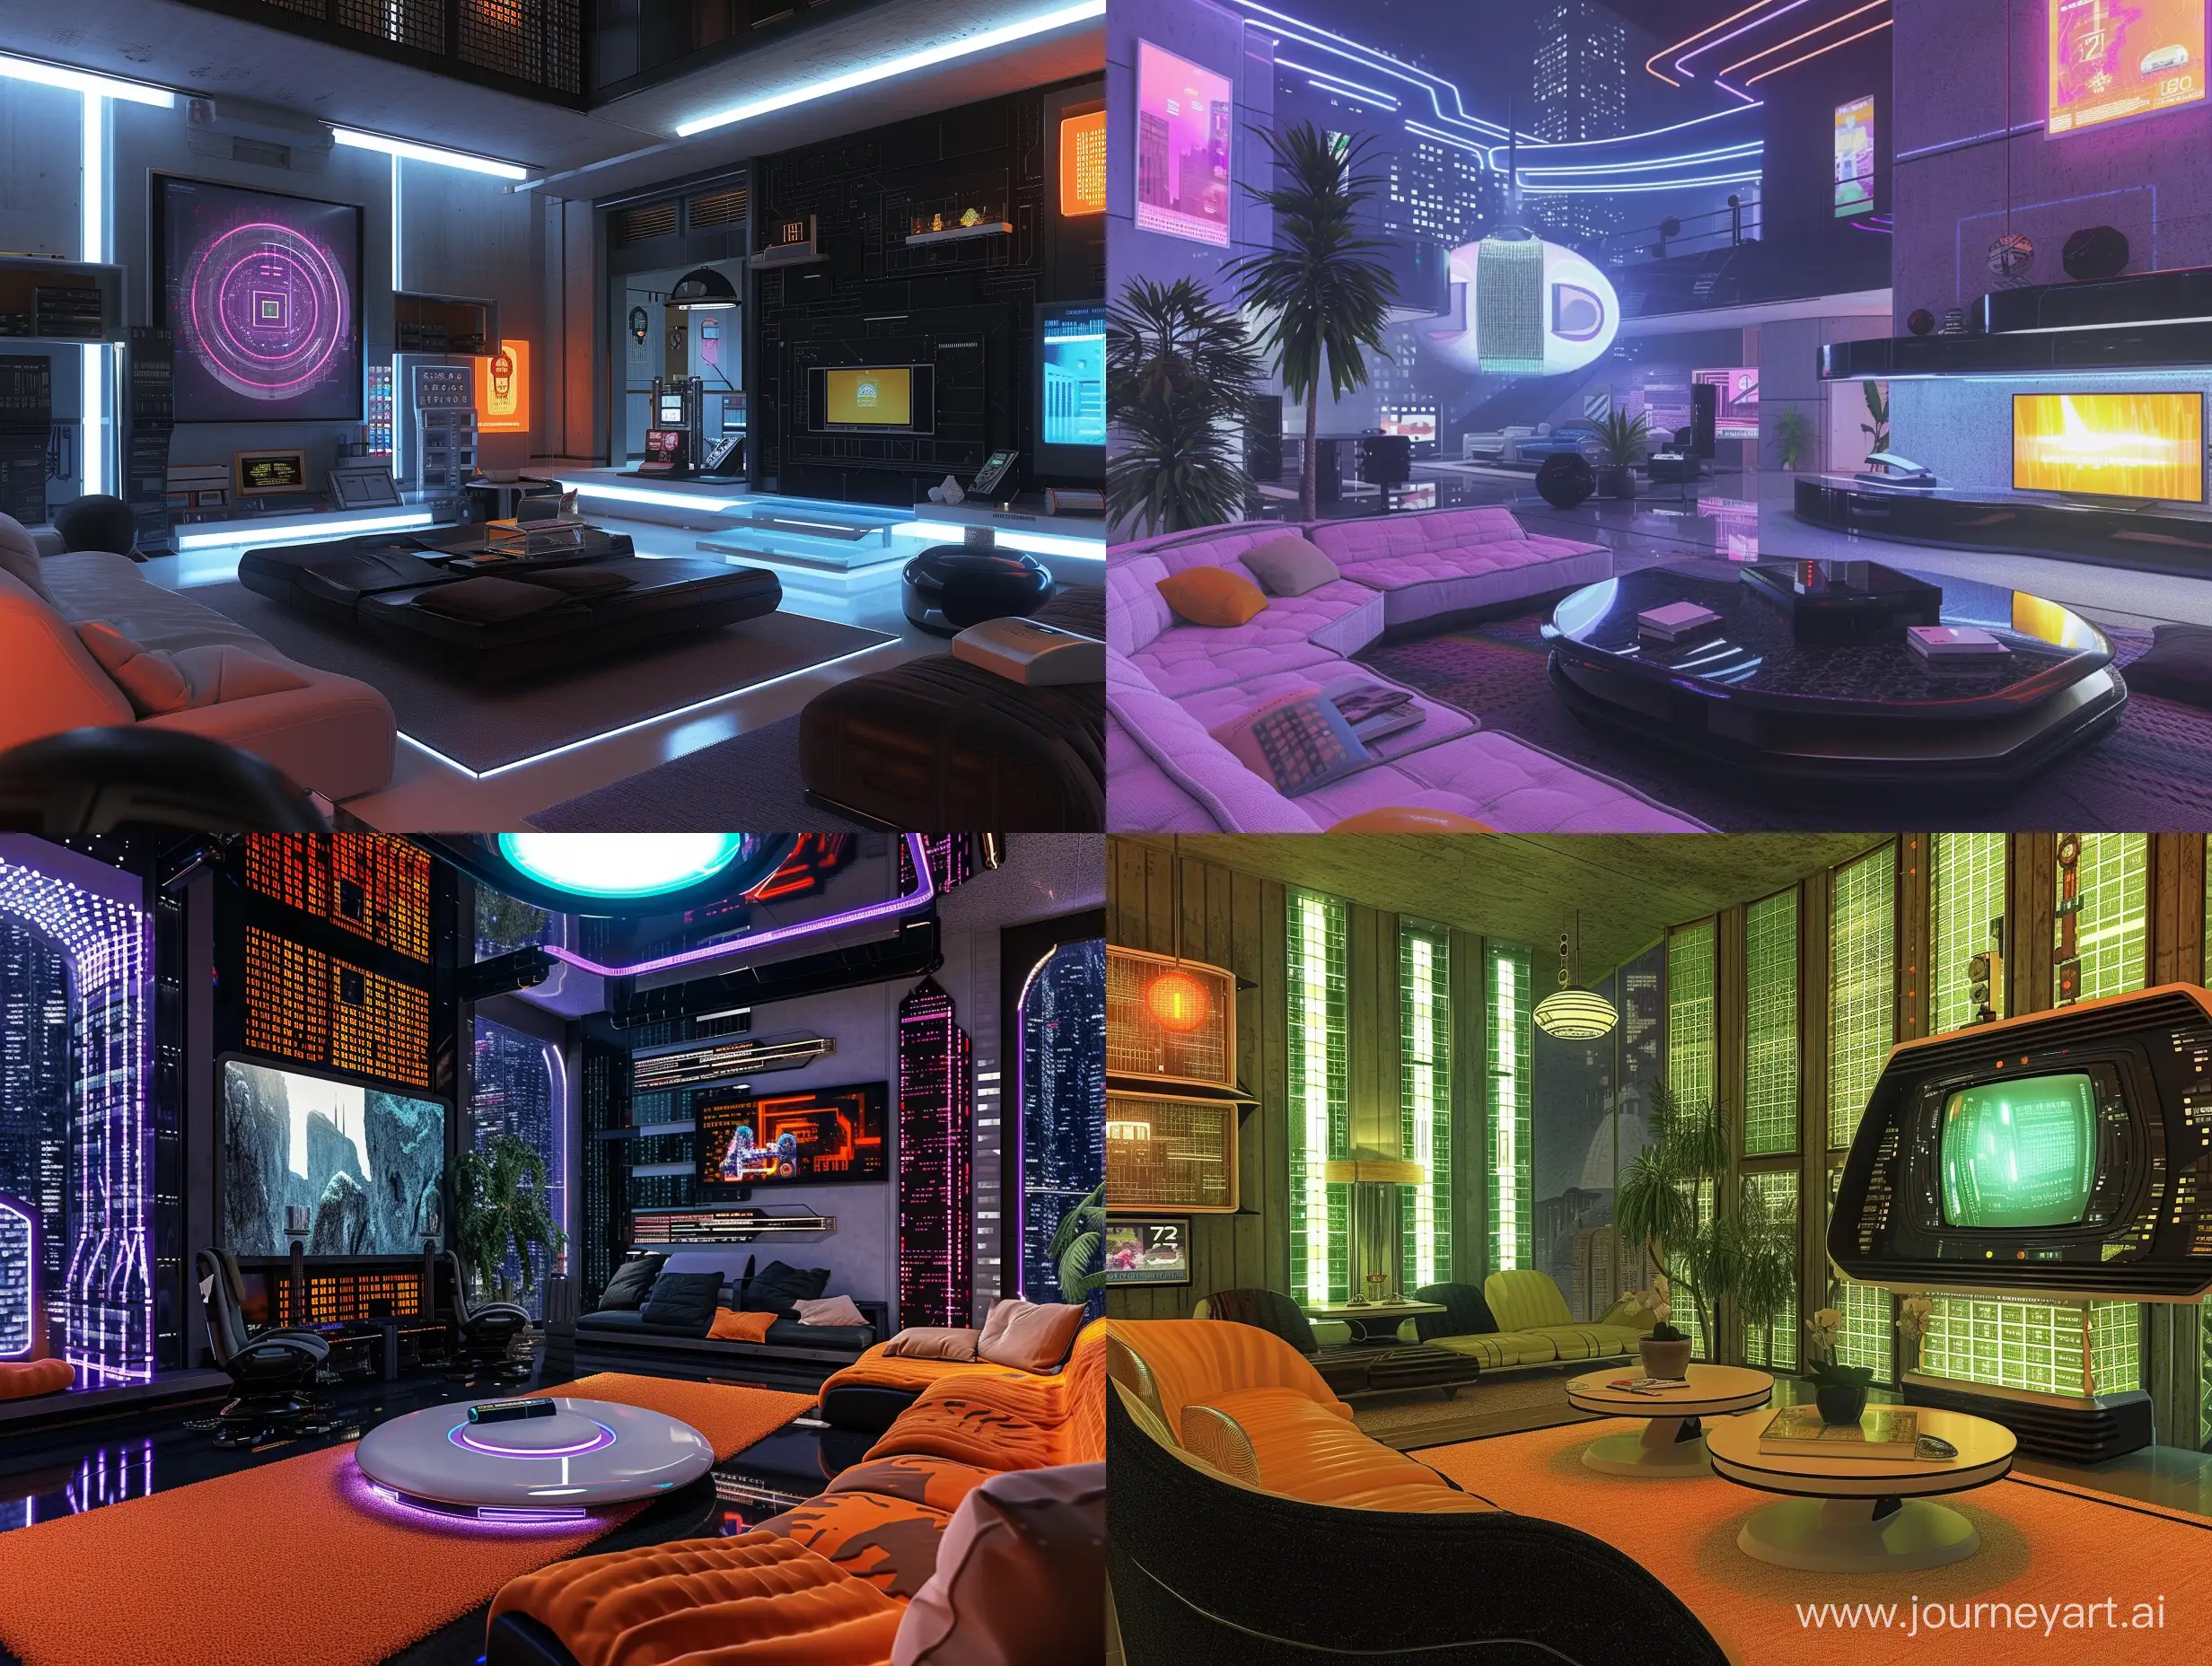 A modern living room with a futuristic Y2K aesthetic and various themes, showcasing unique architecture and an atmospheric cybercore vibe.

